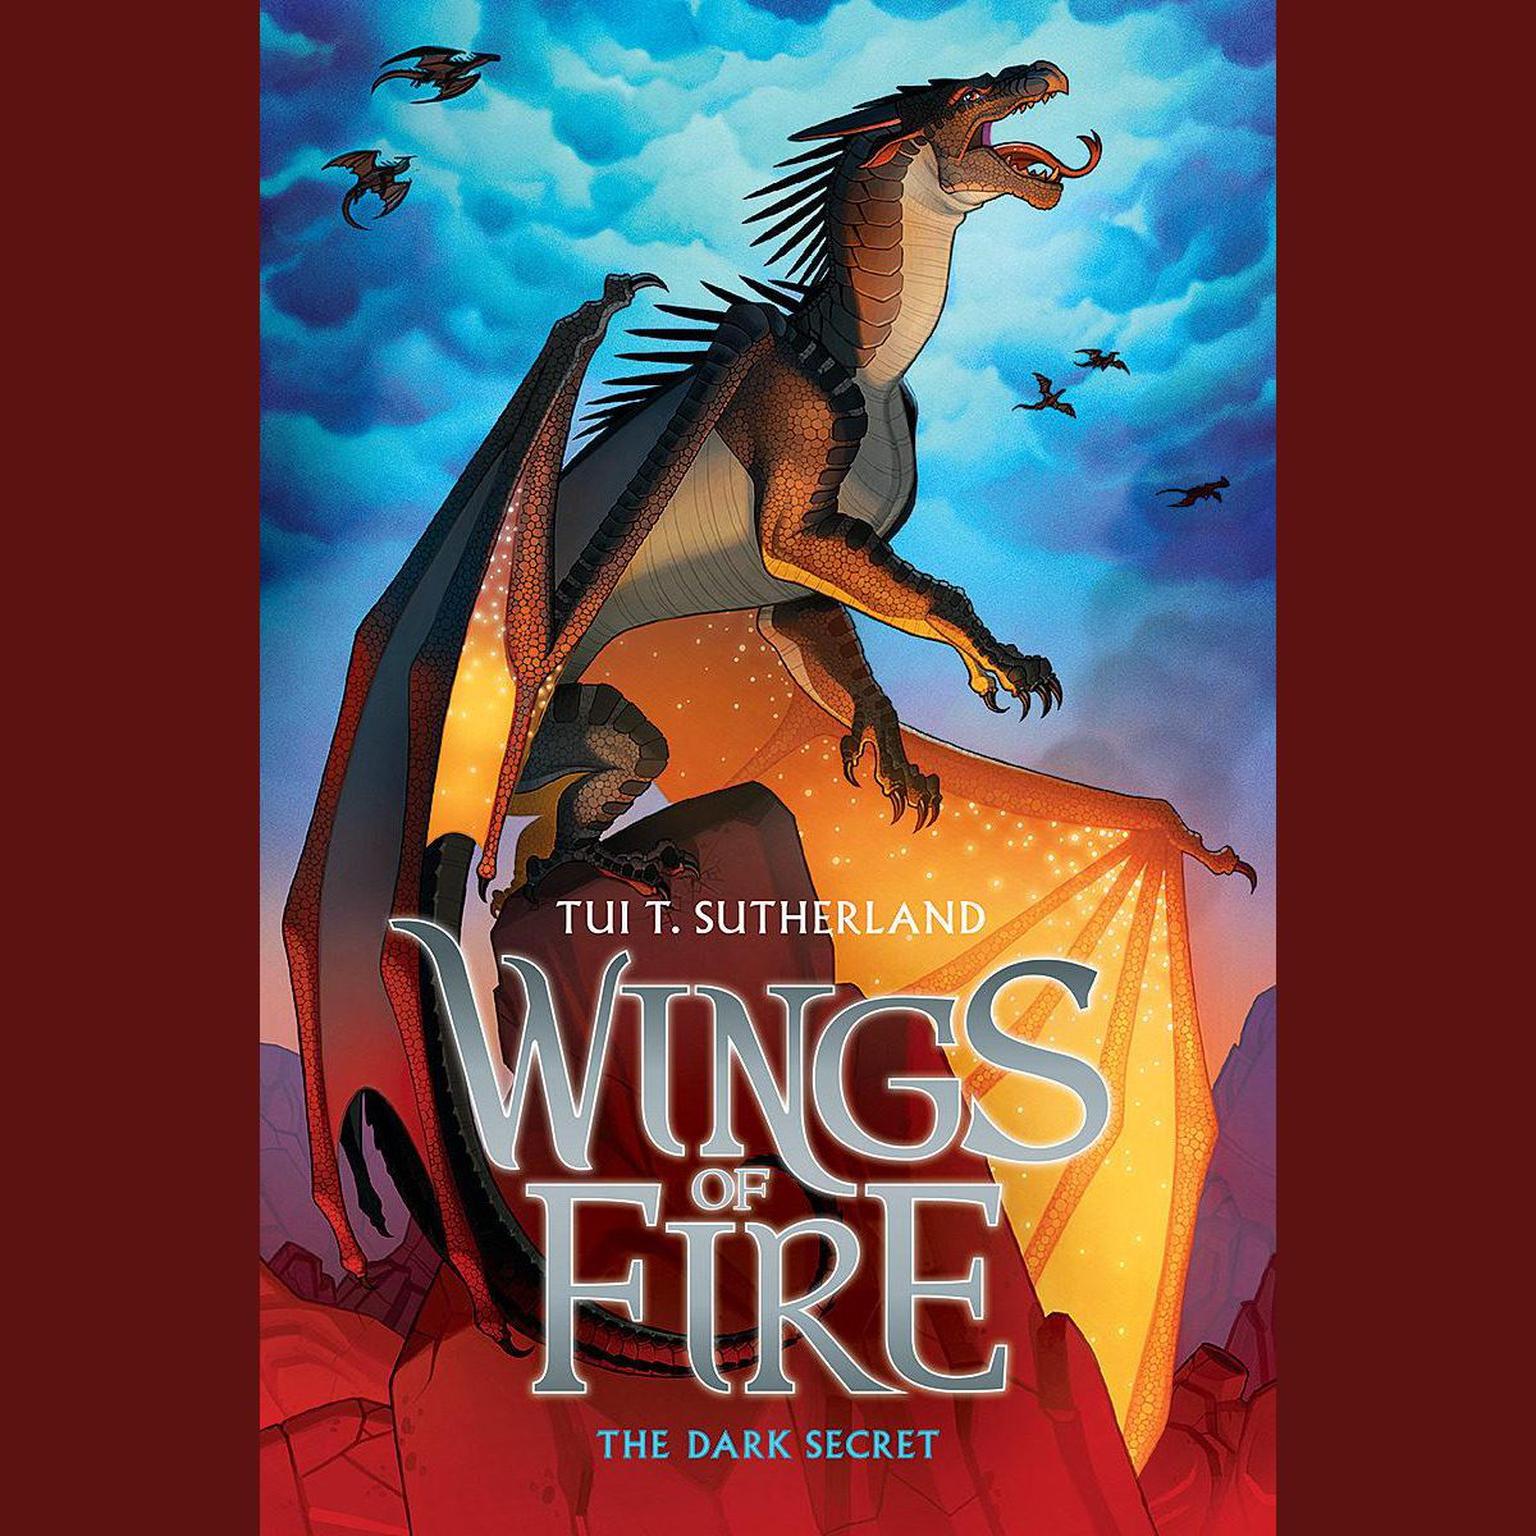 The Dark Secret (Wings of Fire #4) Audiobook, by Tui T. Sutherland